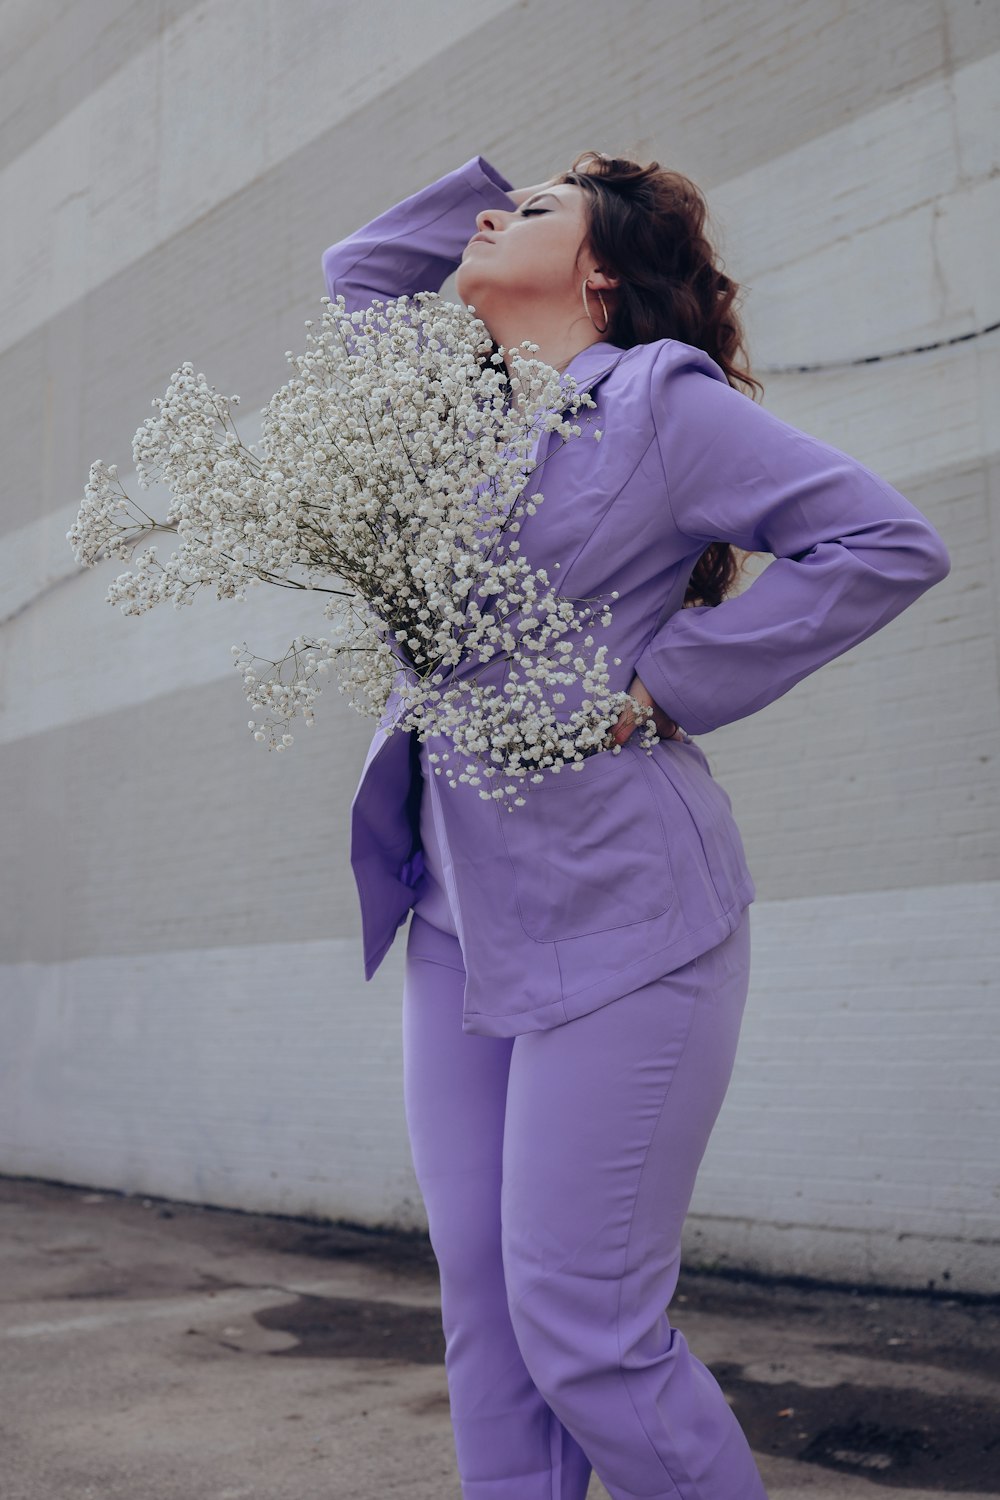 a woman in a purple suit holding a bouquet of flowers